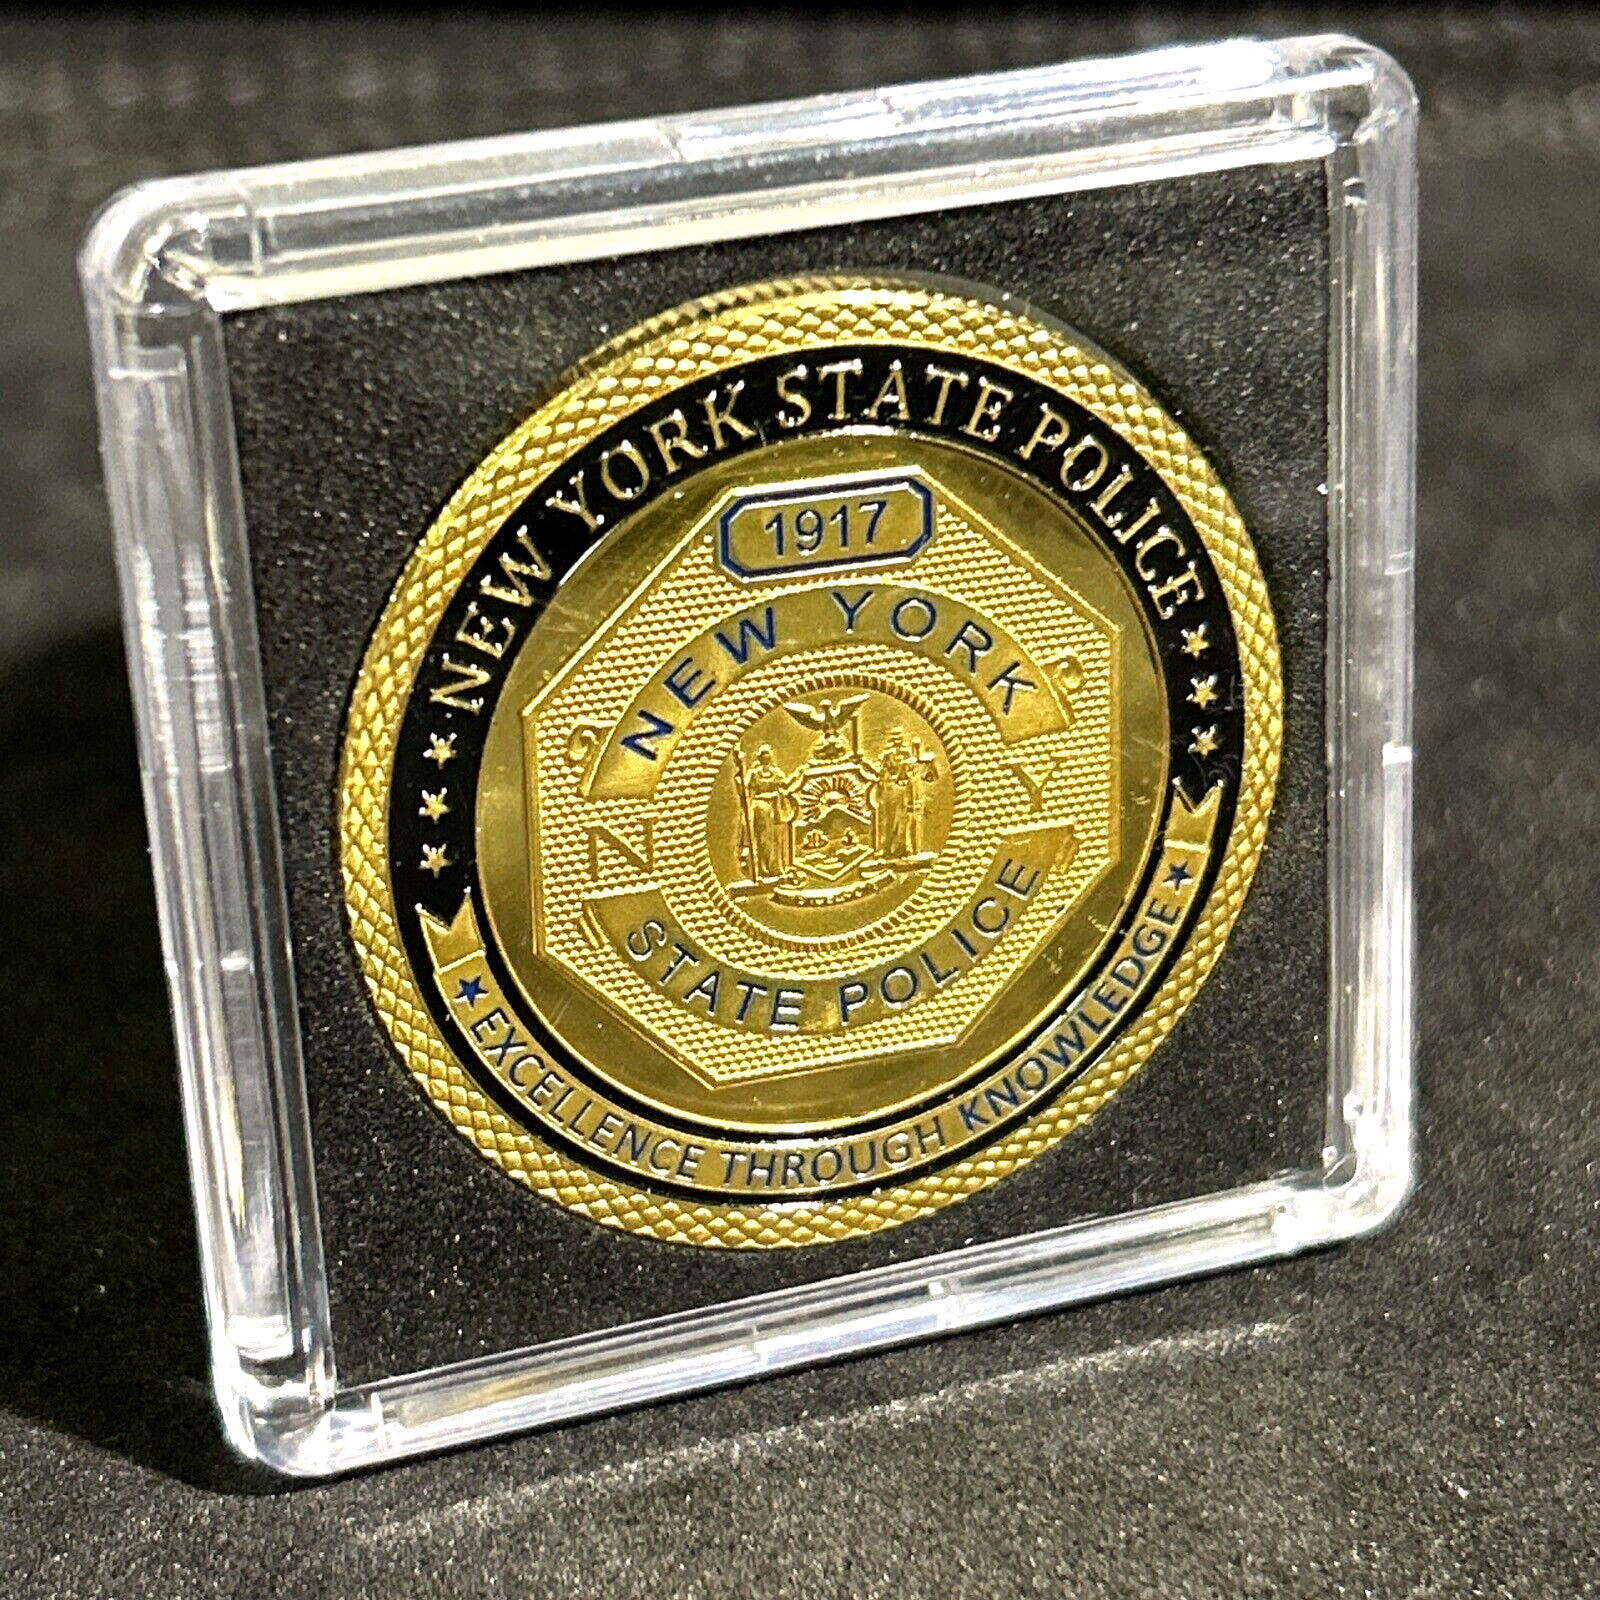 NEW YORK STATE POLICE  NYSP Challenge Coin INCLUDES CASE